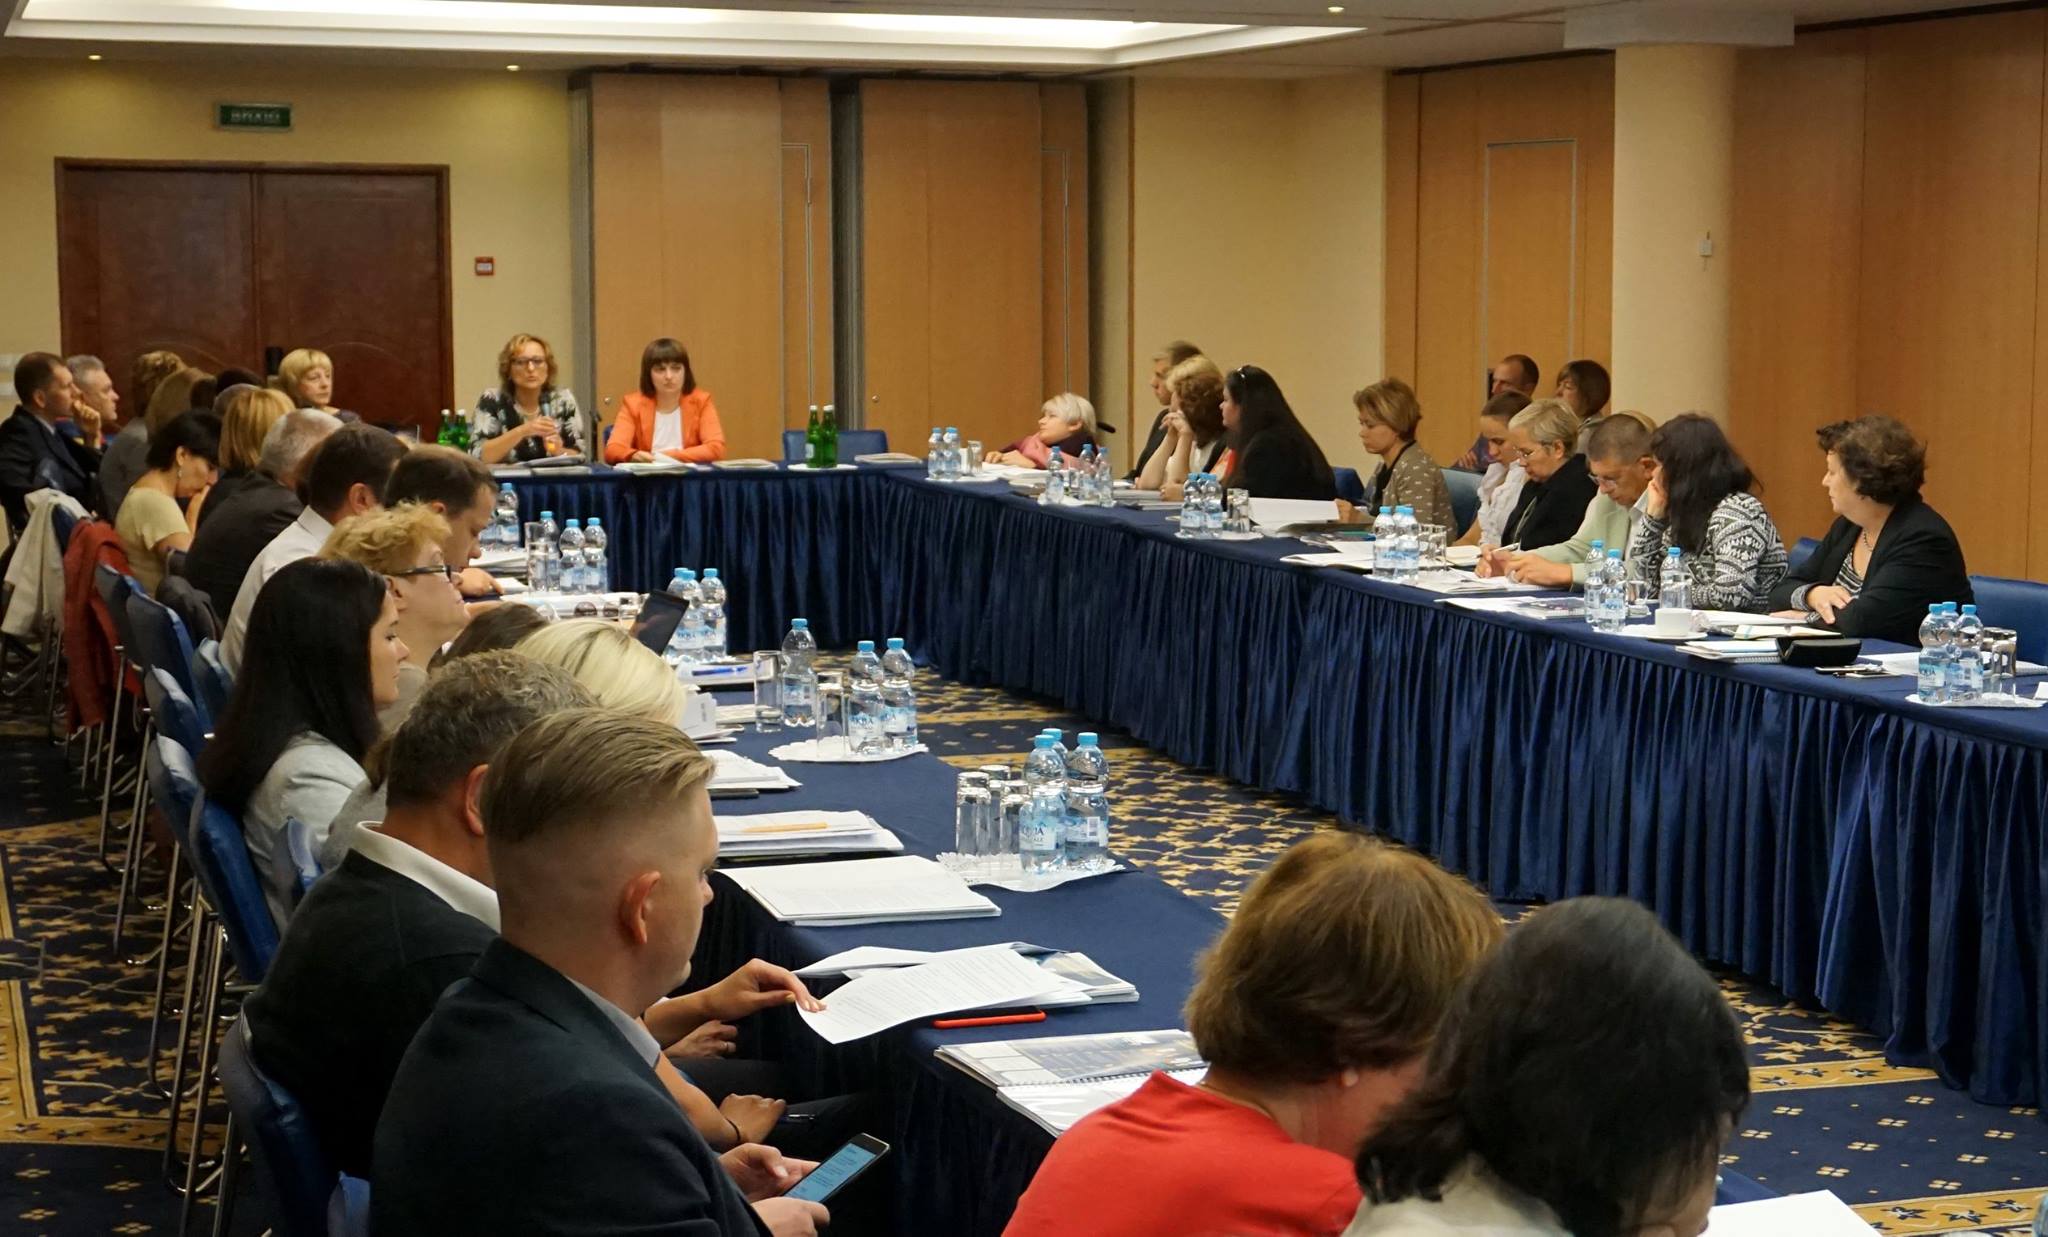 The network develops a system for monitoring social services in Ukraine